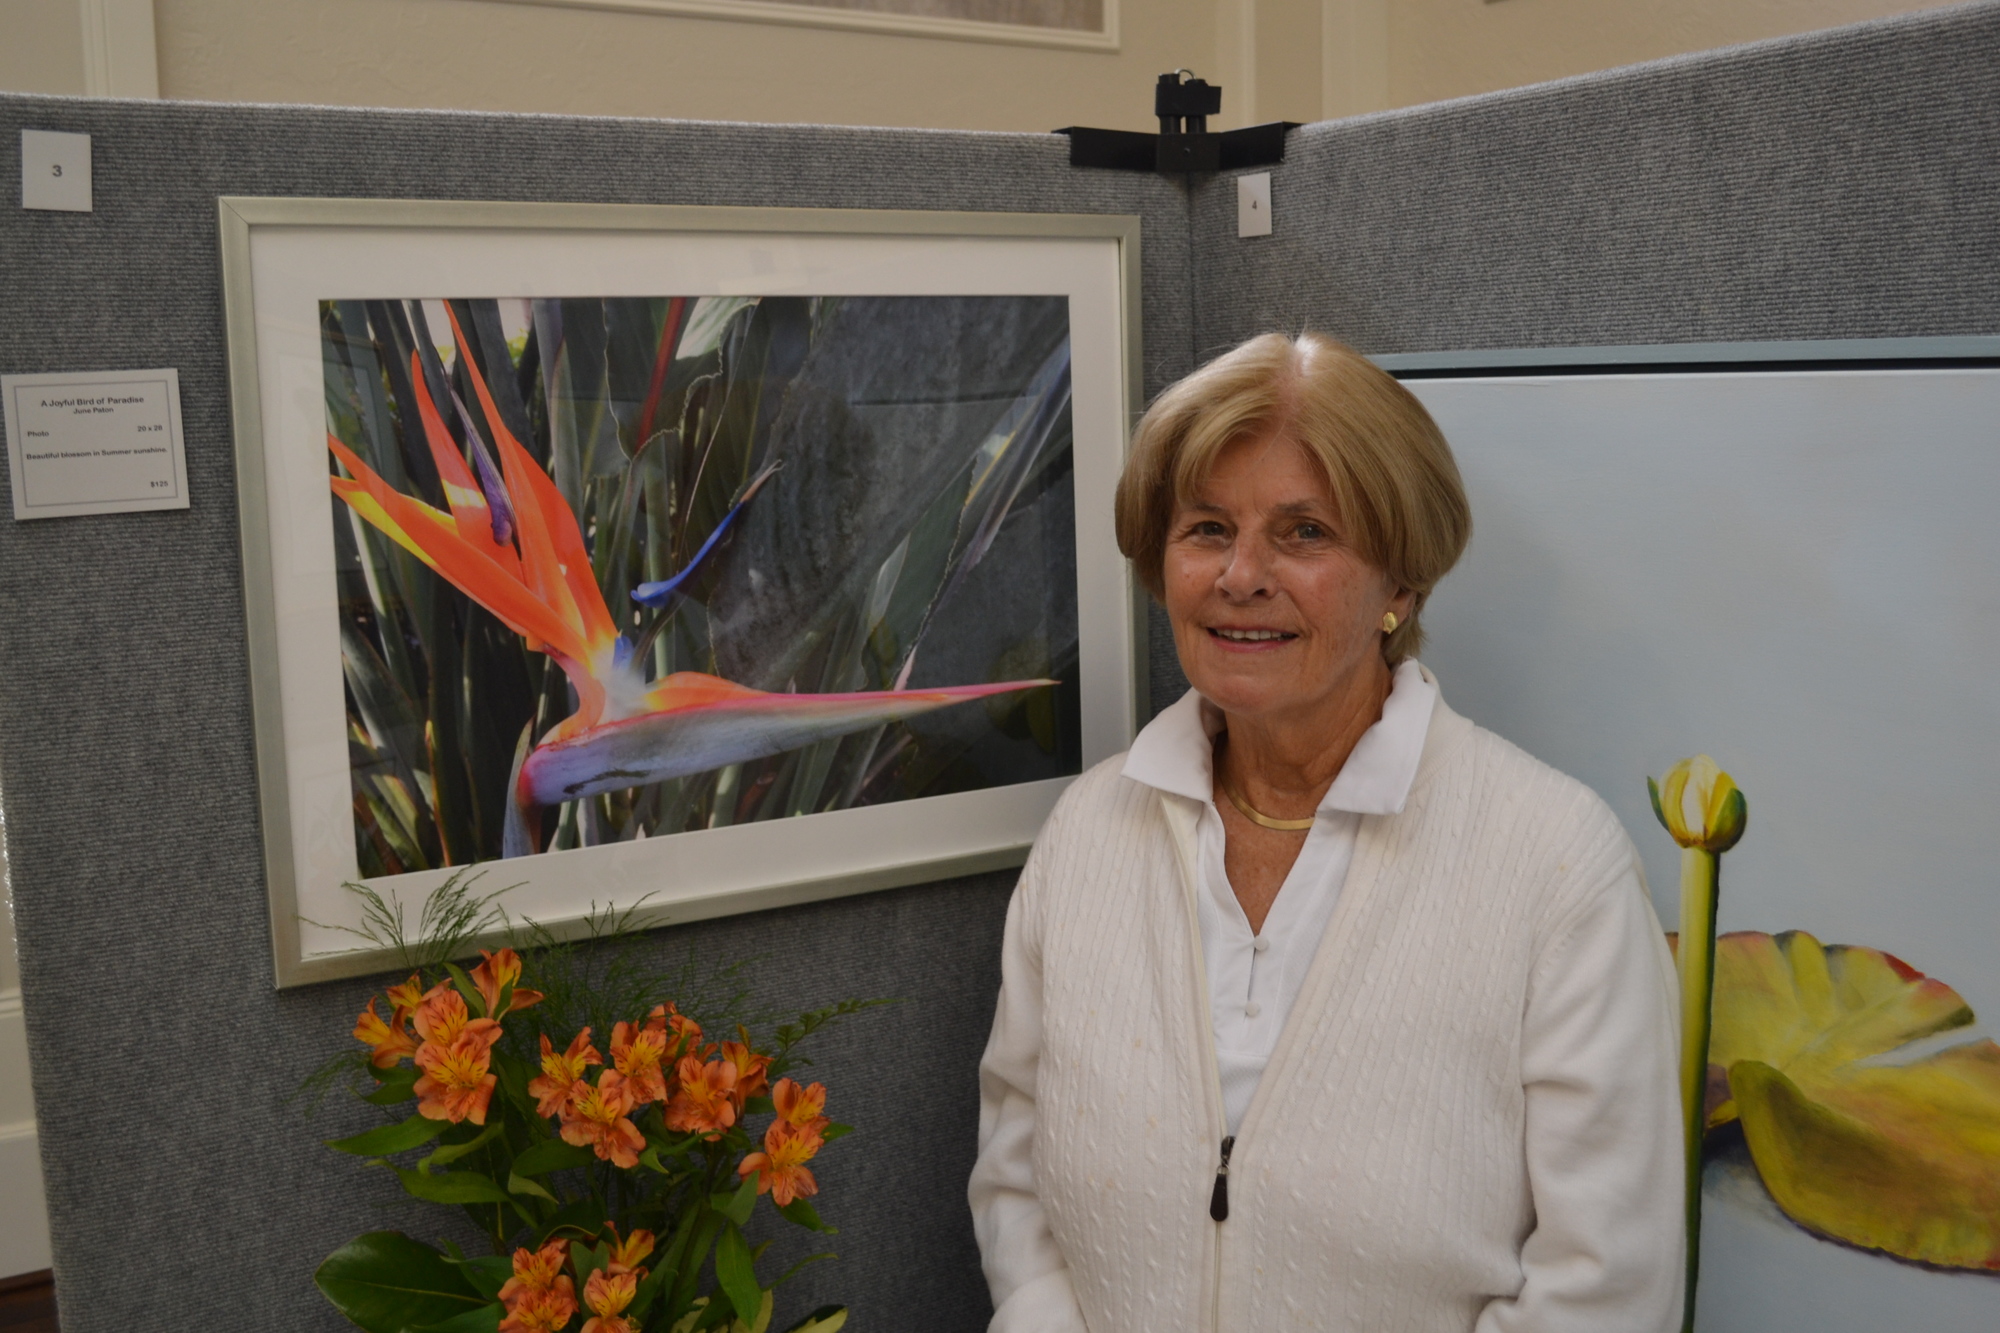 June Paton stands beside her favorite photo, which depicts a bird of paradise.